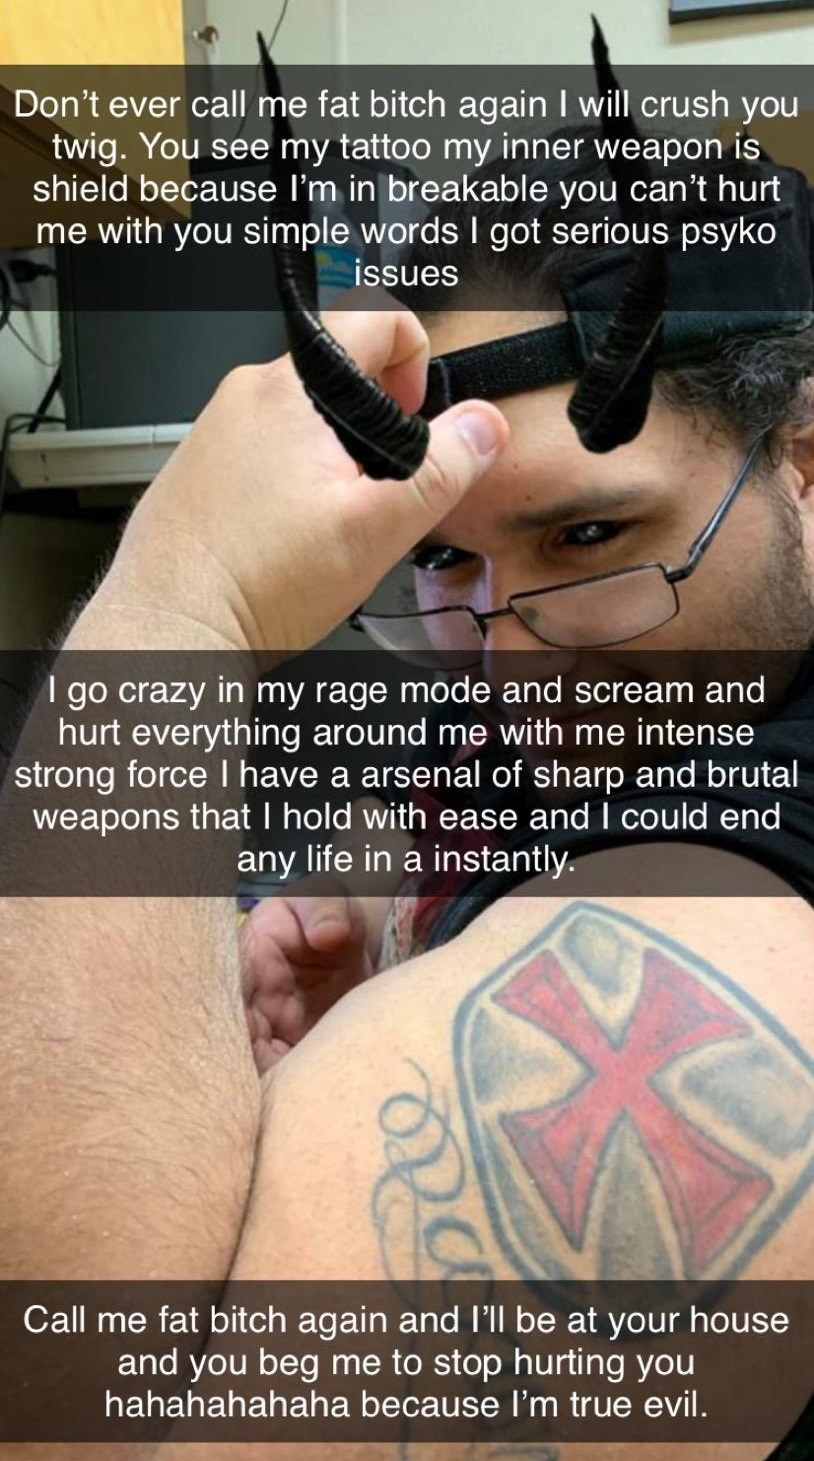 arm - Don't ever call me fat bitch again I will crush you twig. You see my tattoo my inner weapon is shield because I'm in breakable you can't hurt me with you simple words I got serious psyko issues I go crazy in my rage mode and scream and hurt everythi